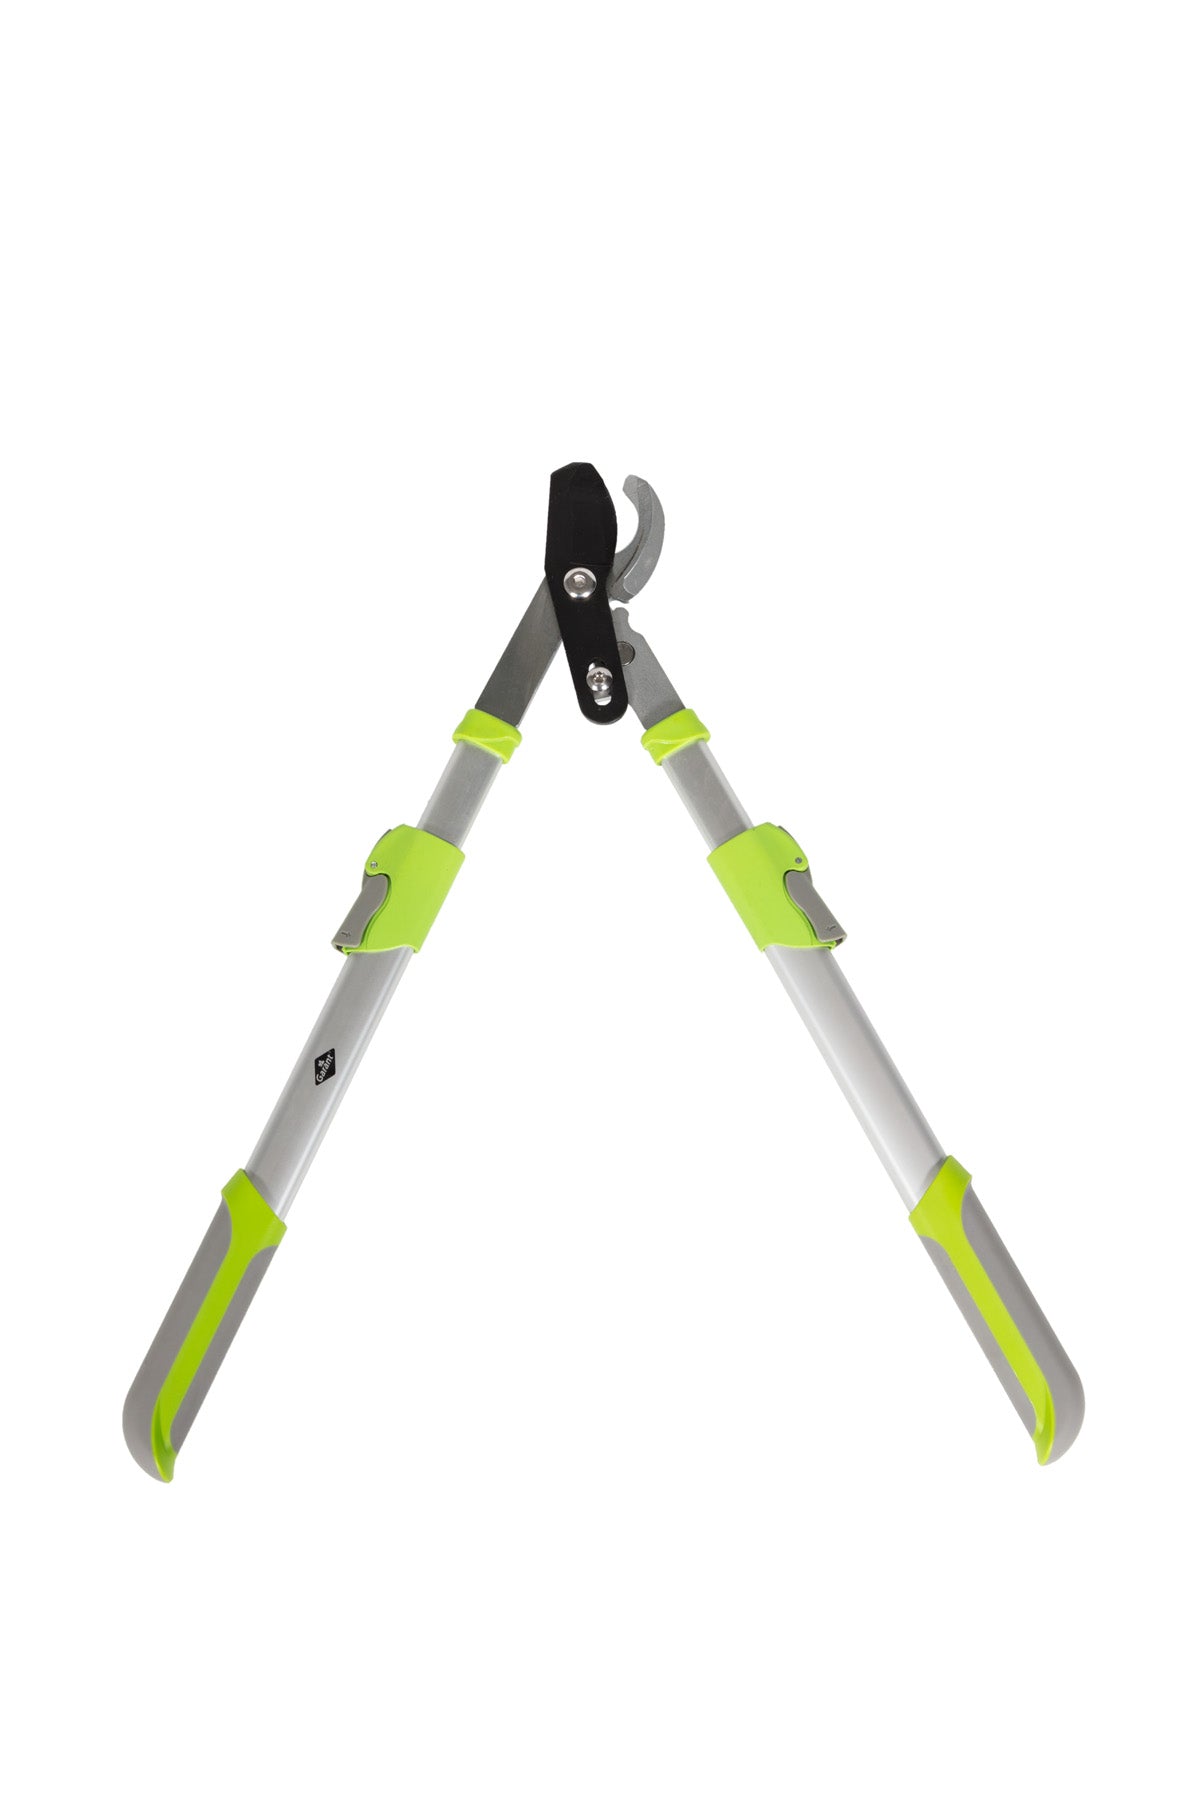 Bypass lopping shears, telescopic handles